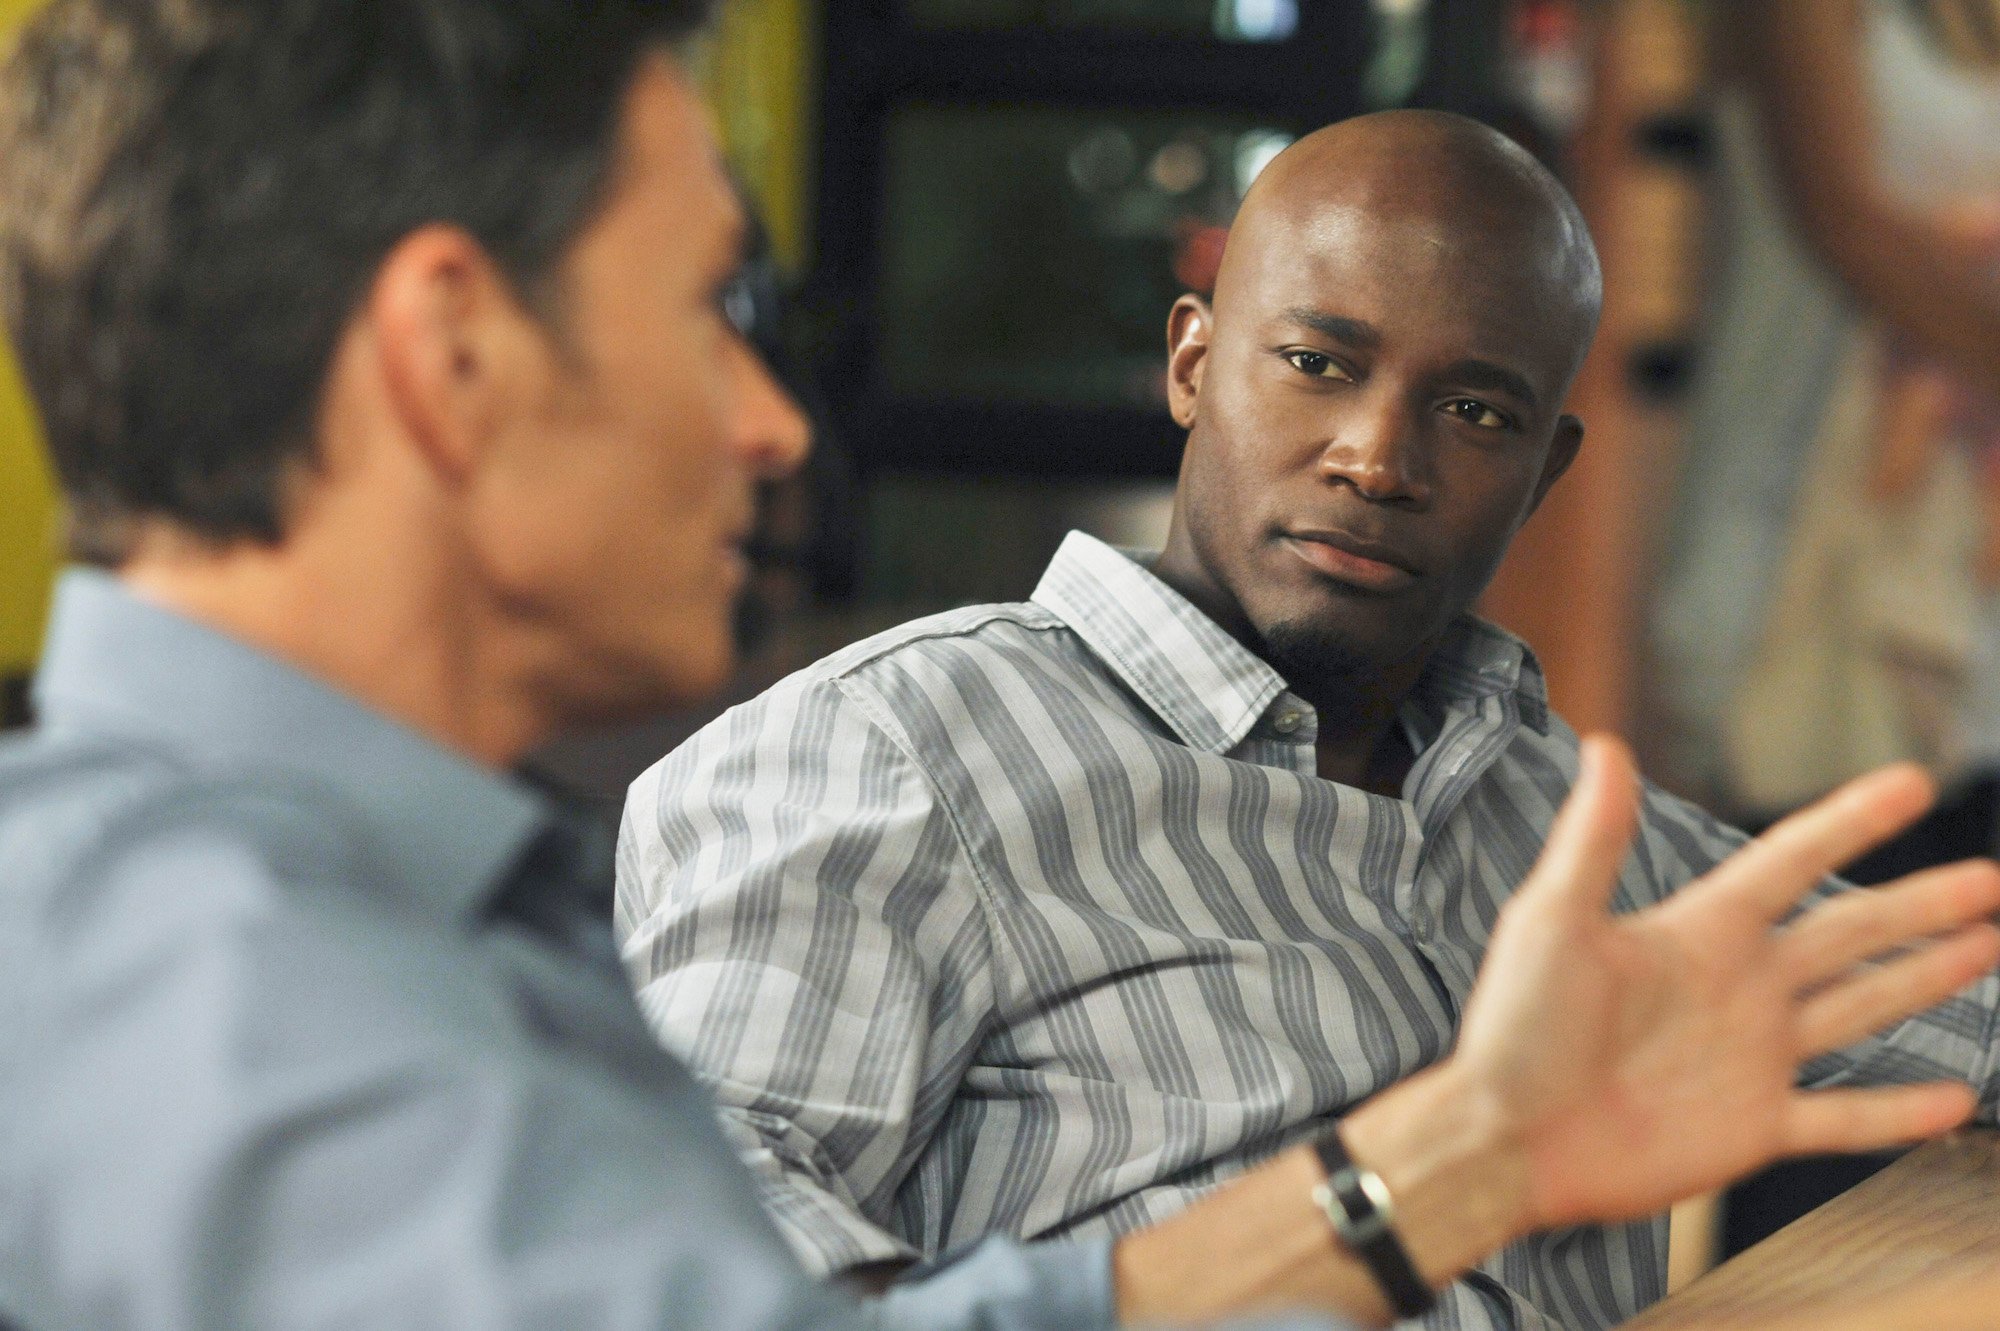 Taye Diggs listening to someone talk in ABC's 'Private Practice.'